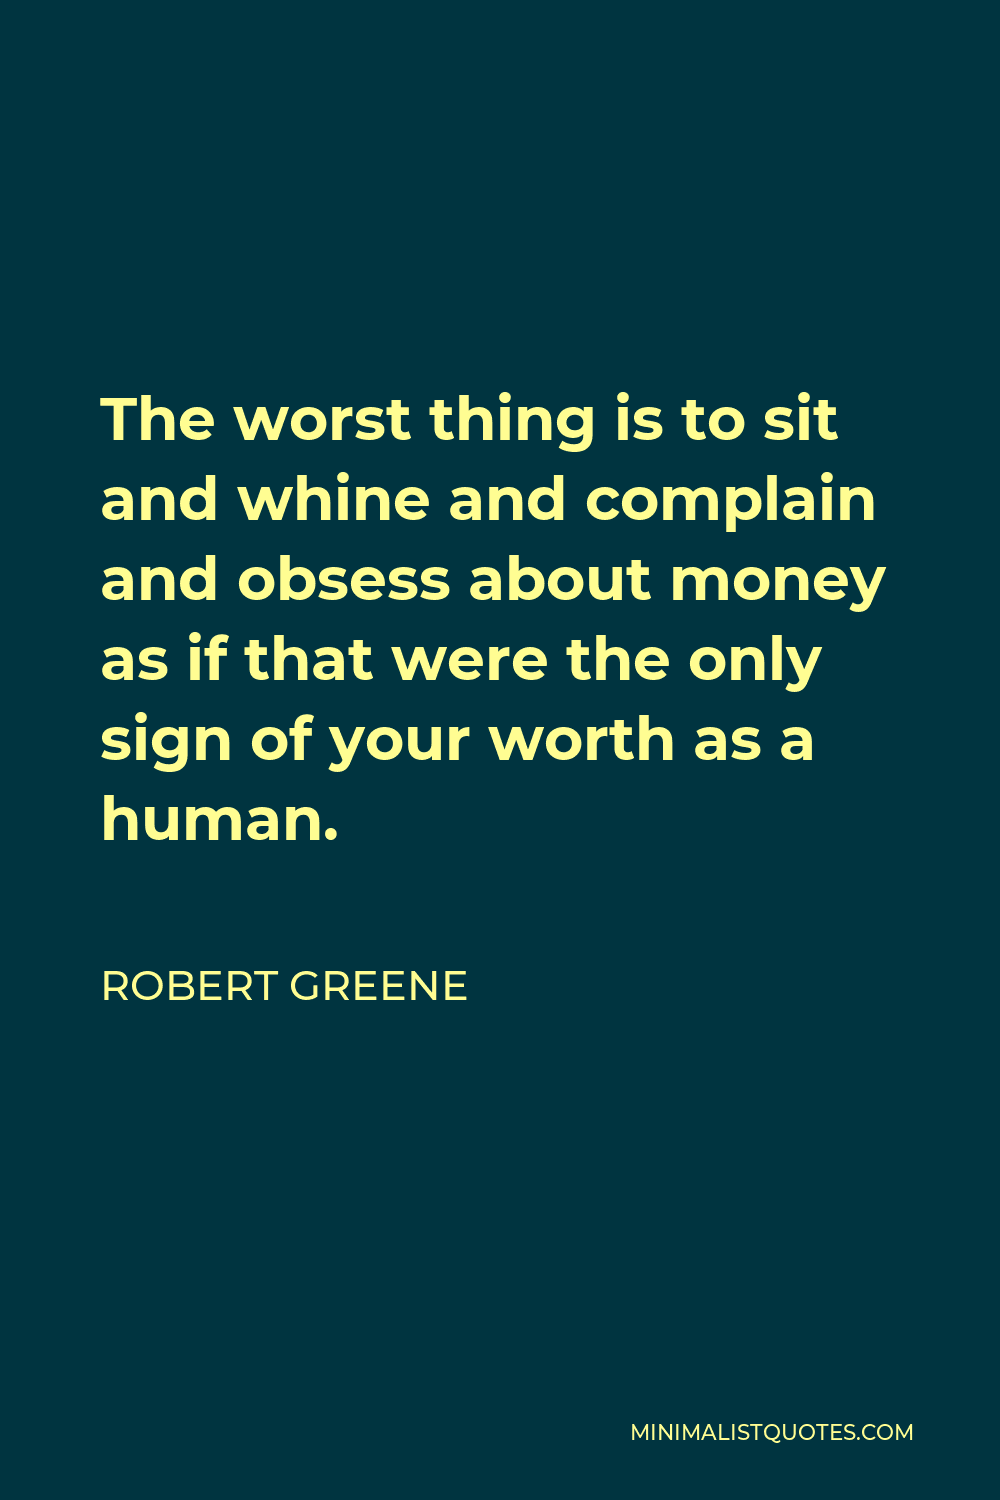 Robert Greene Quote - The worst thing is to sit and whine and complain and obsess about money as if that were the only sign of your worth as a human.